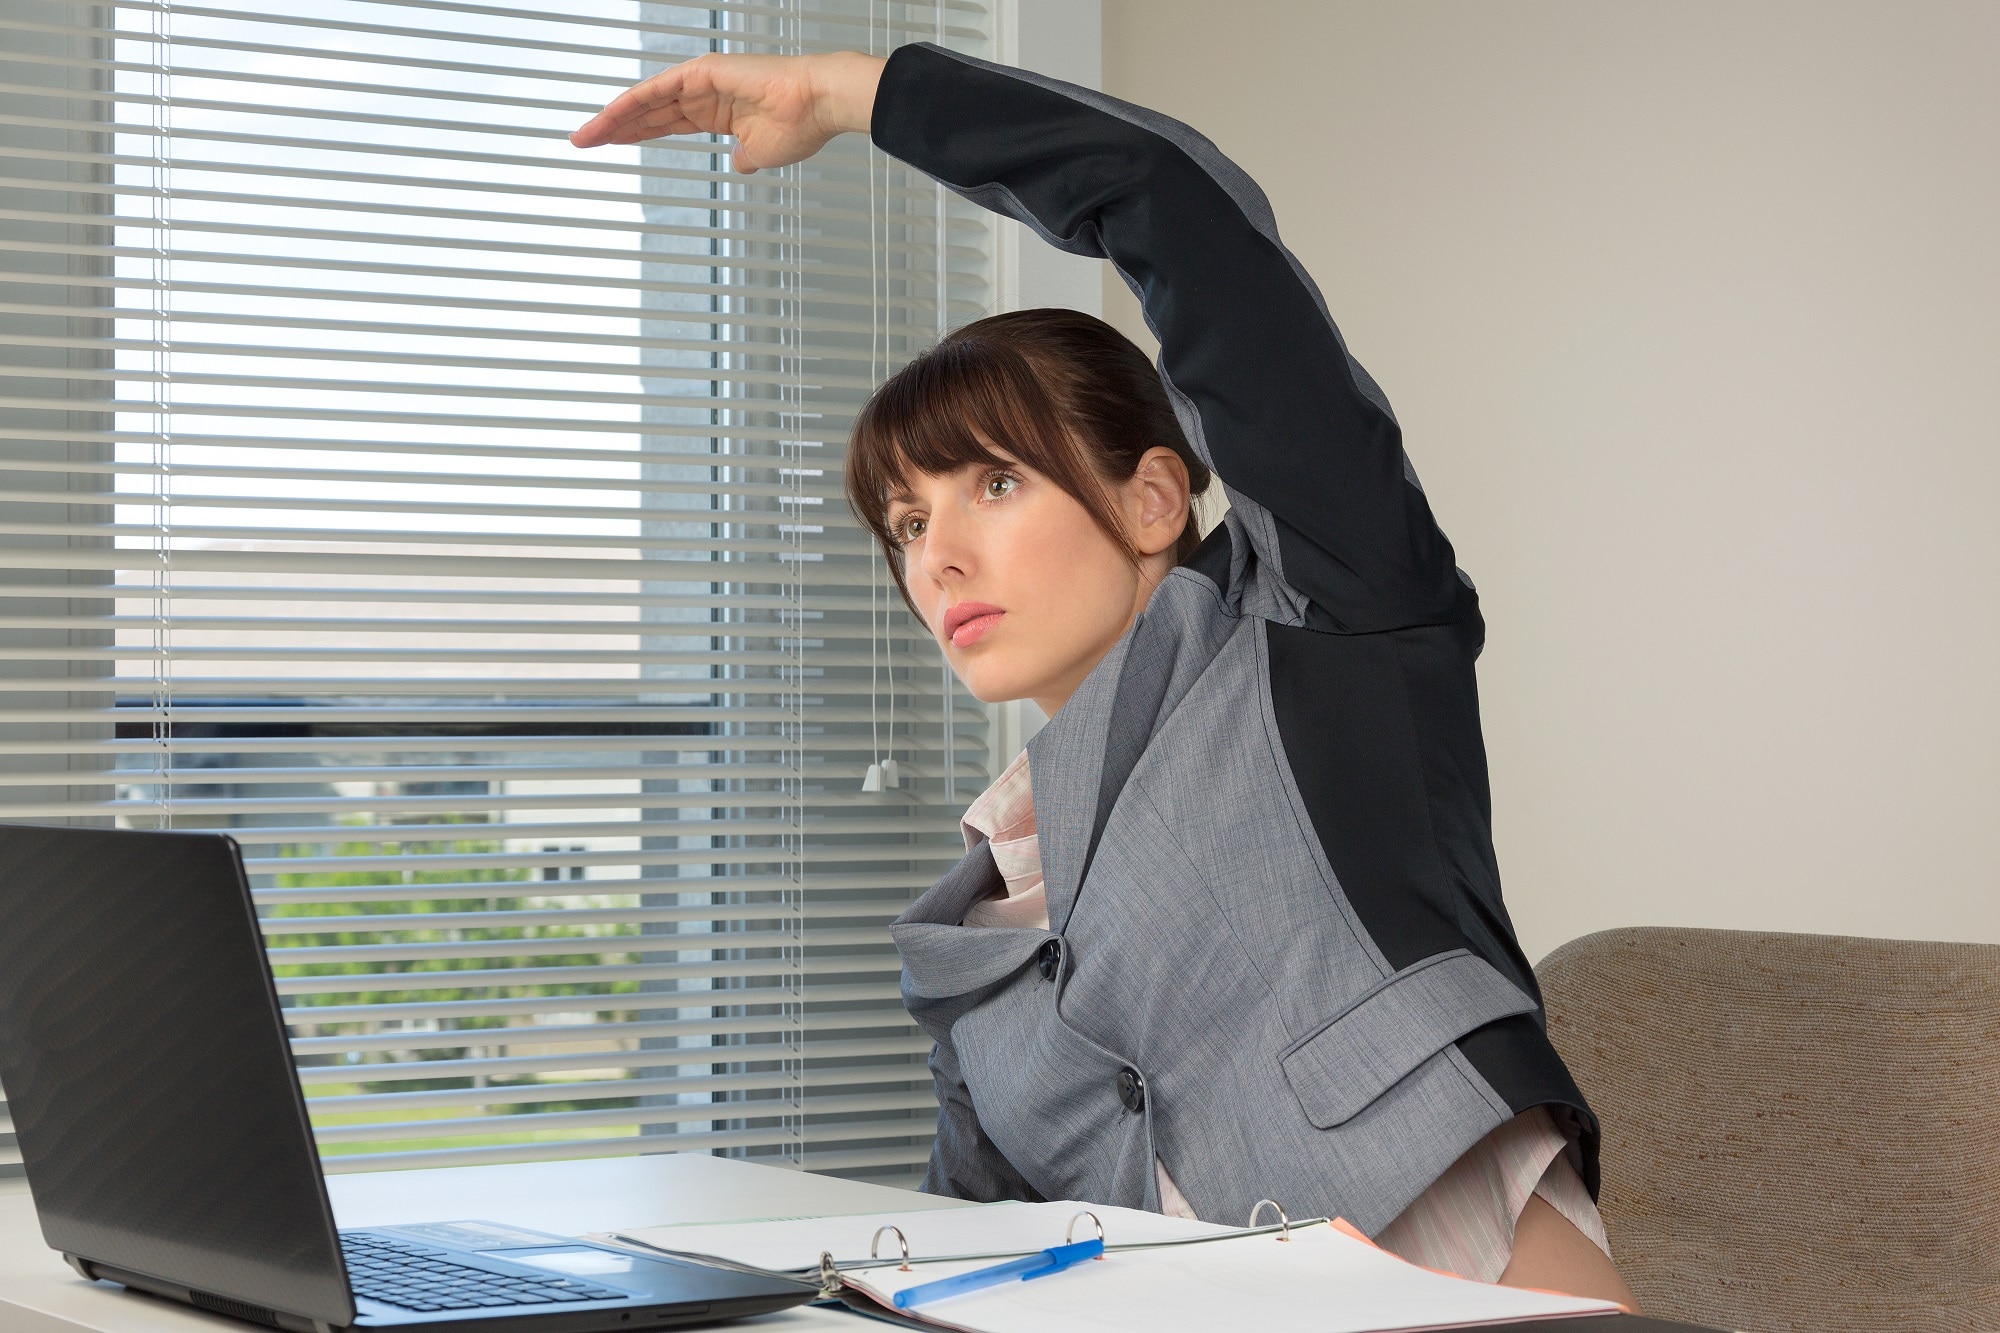 Simple Stretches You Can Do At Your Desk To Relieve Tension - RQ Focus